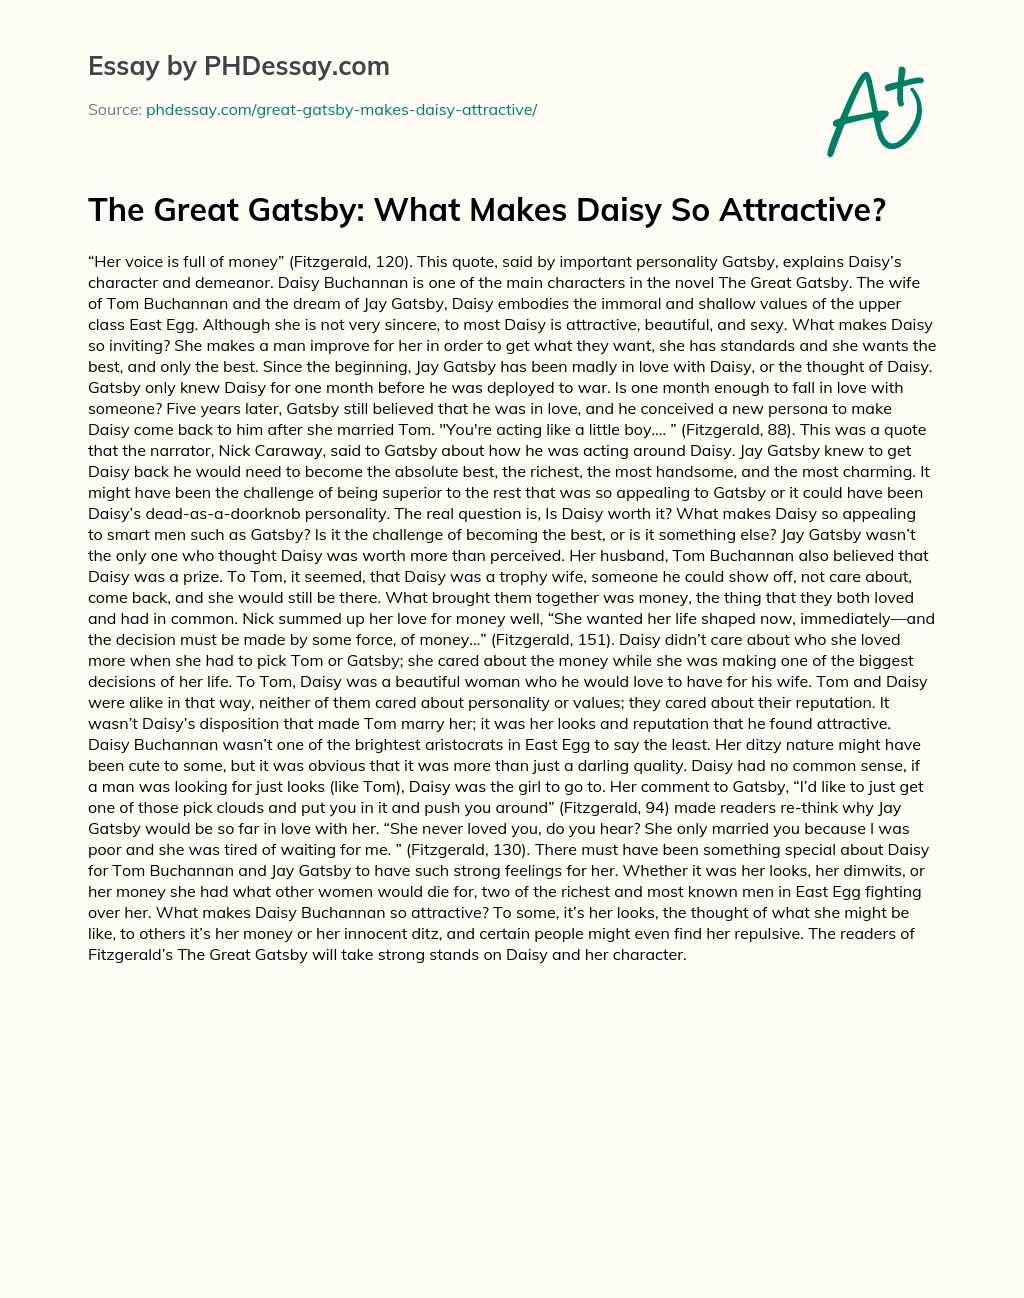 The Great Gatsby: What Makes Daisy So Attractive? essay